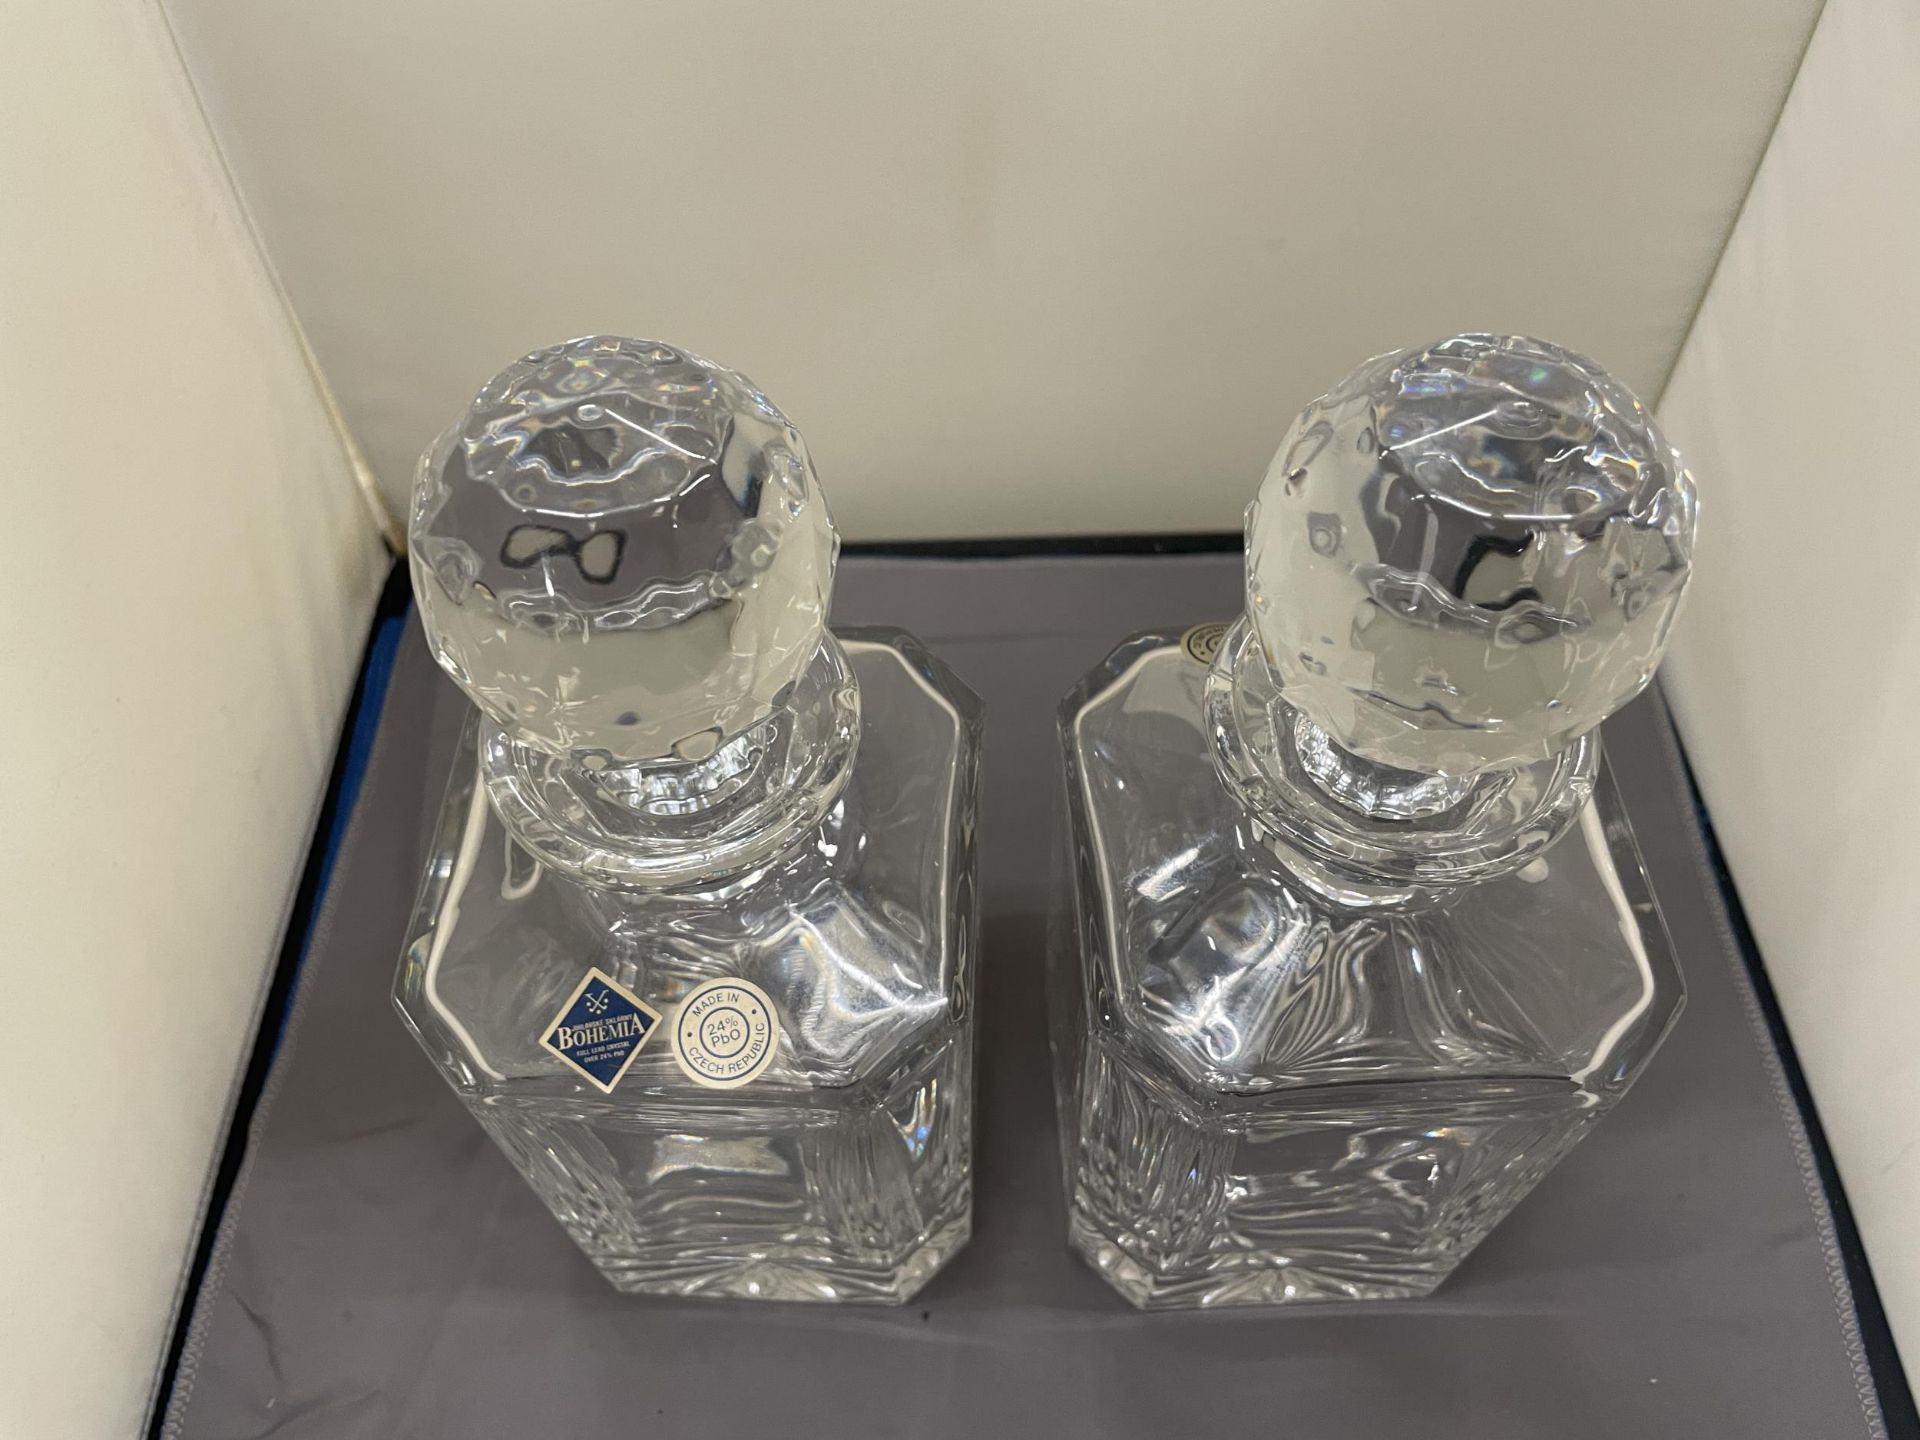 TWO HEAVY BOHEMIA, LEAD CRYSTAL DECANTERS - Image 3 of 3